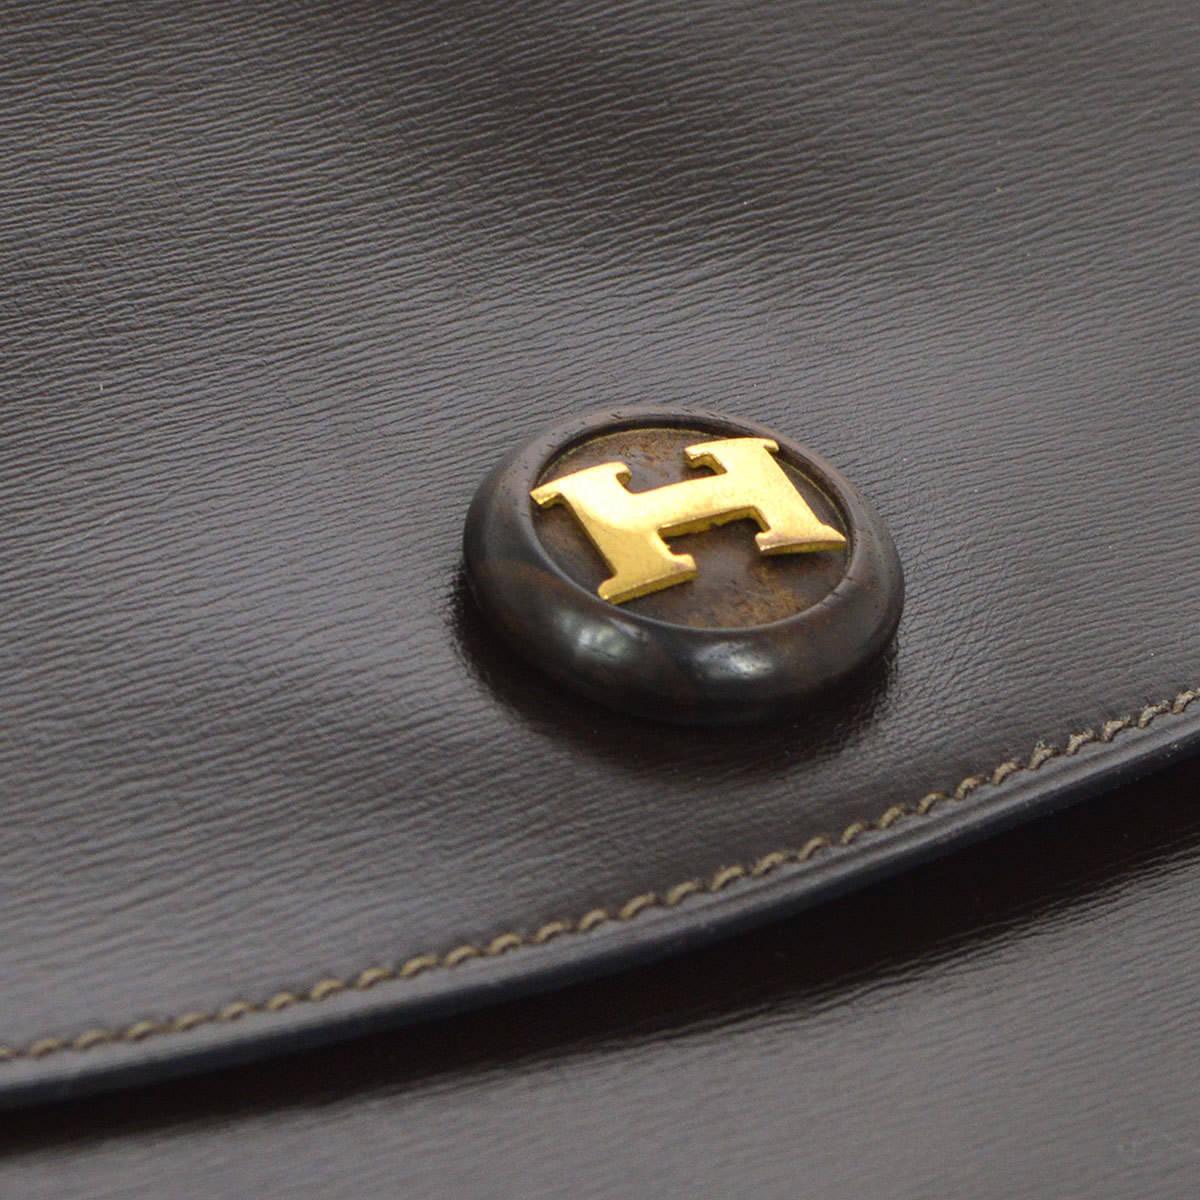 Hermes Chocolate Brown 'H' Charm Leather Evening Envelope Clutch Flap Bag

Leather
Gold tone hardware
Button closure
Date code present
Measures 9.5